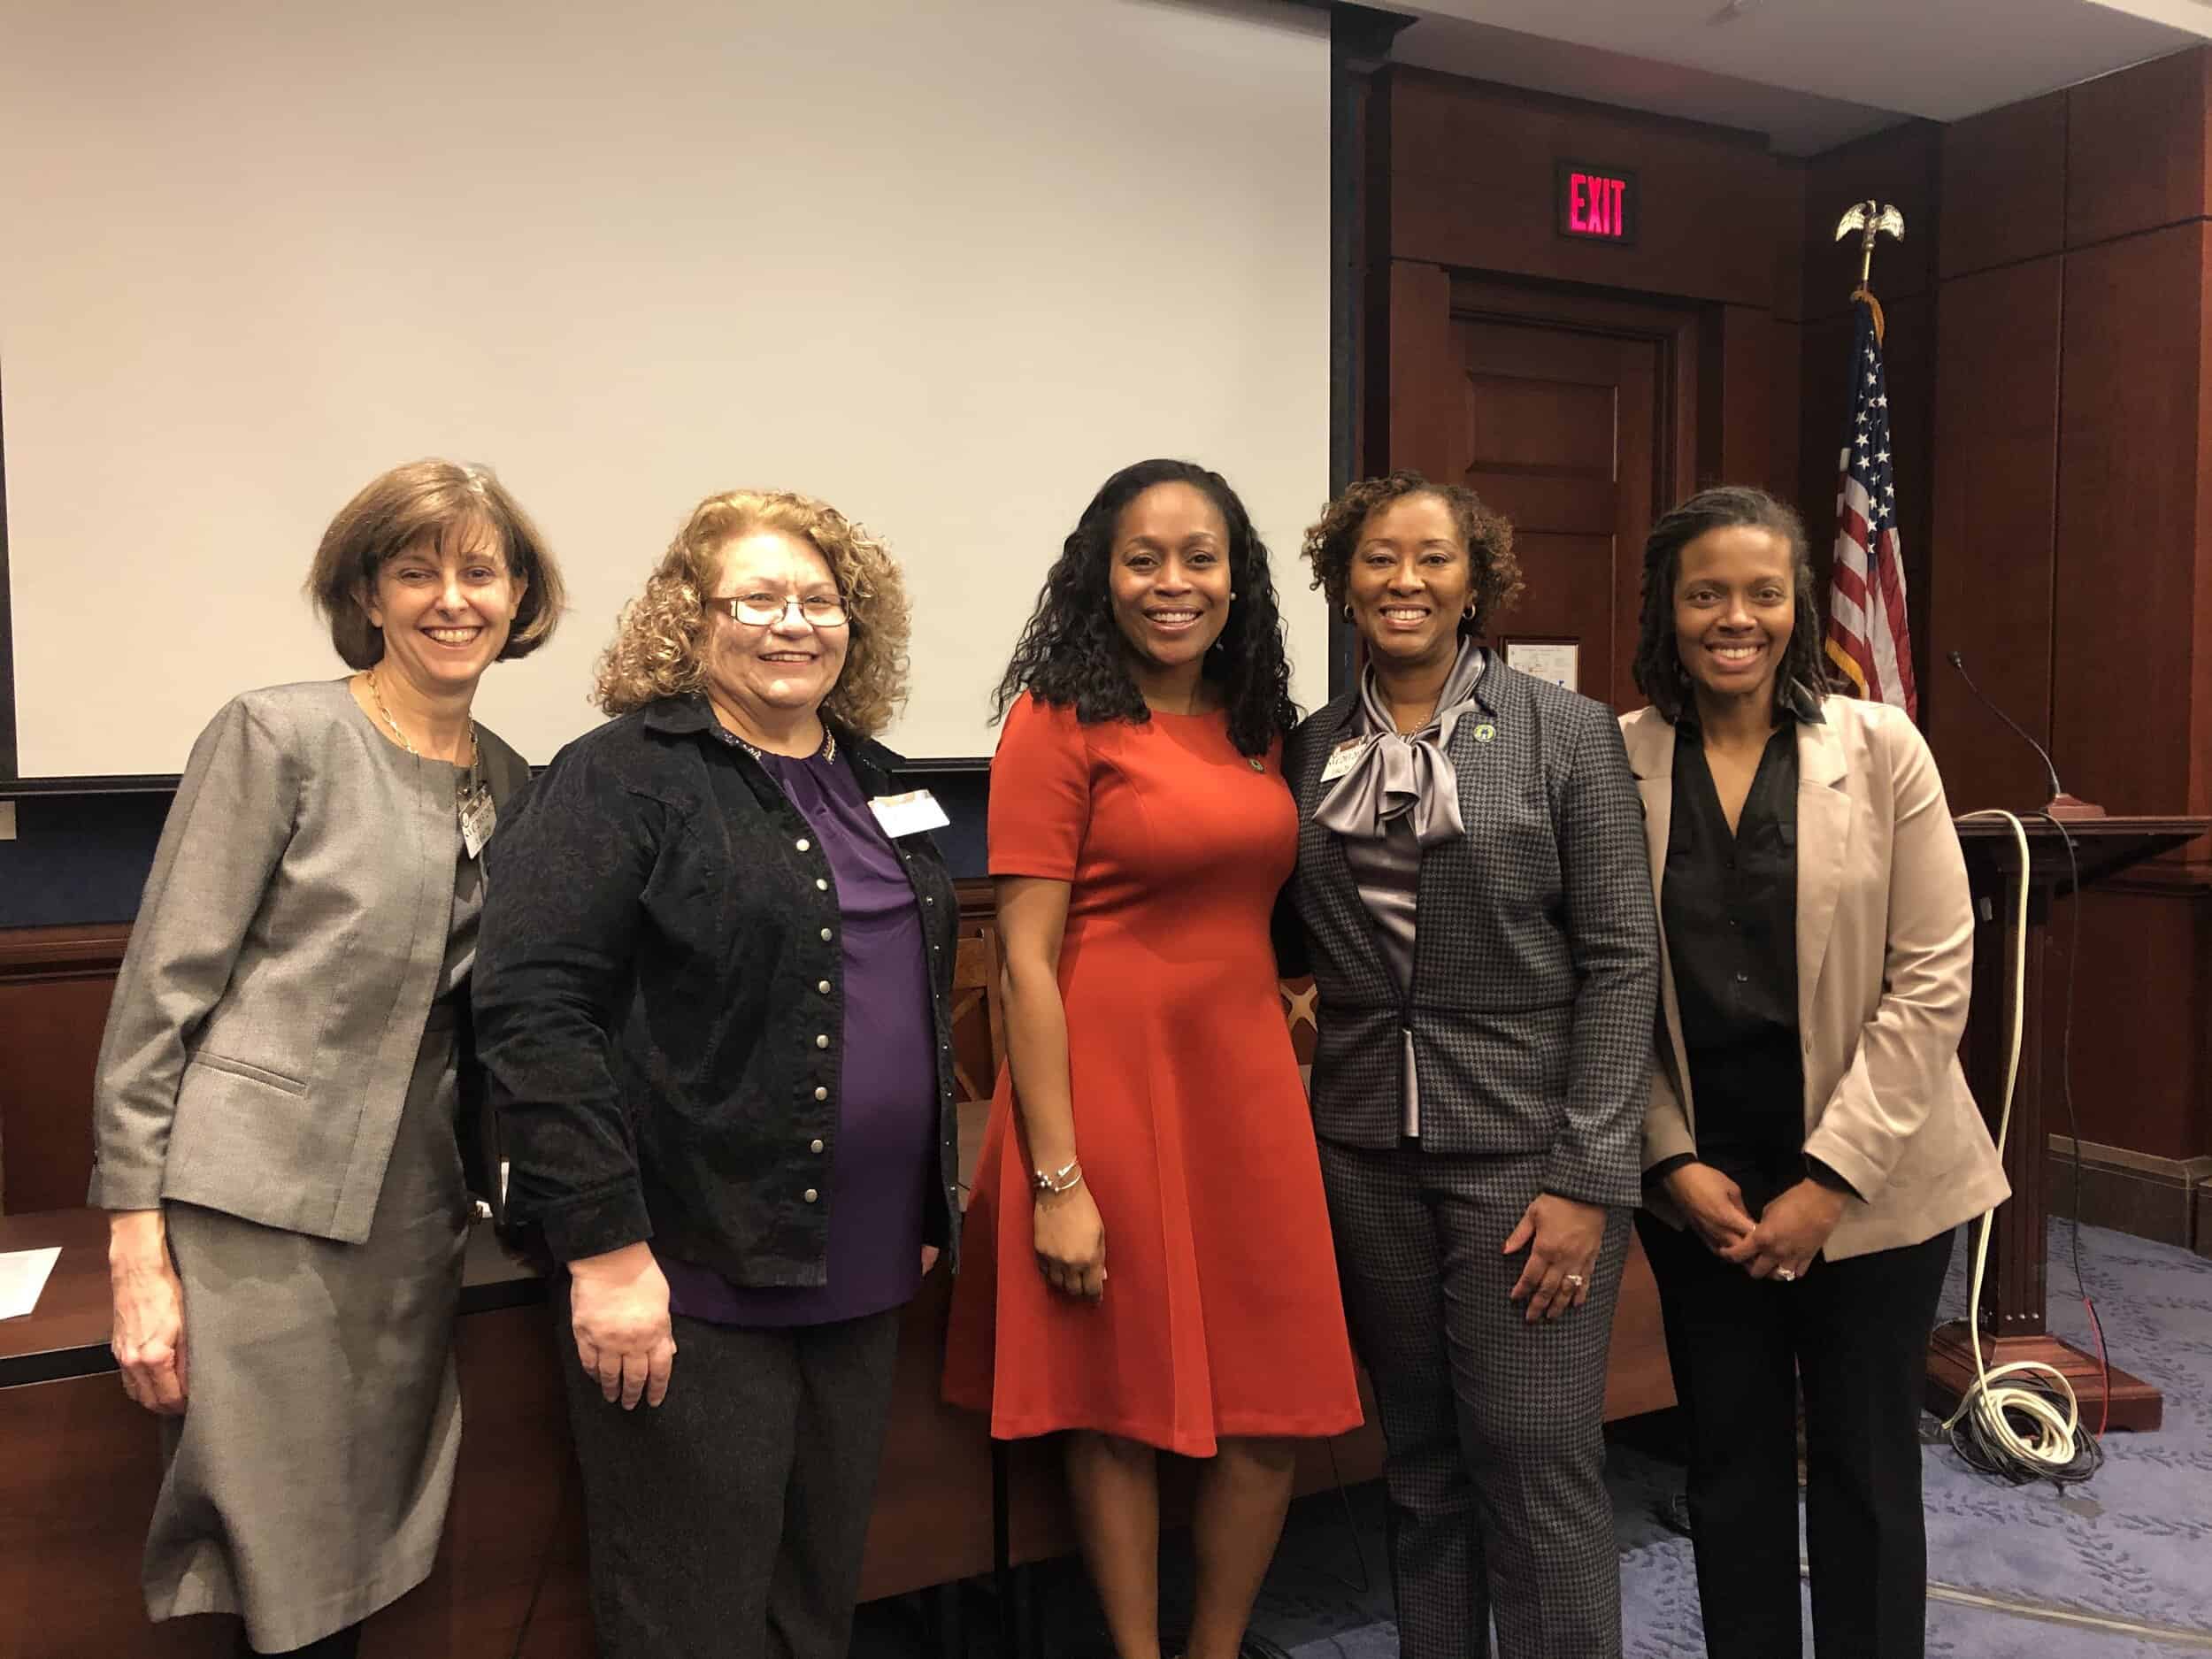 From left are: Dr. Cynthia Minkovitz, American Academy of Pediatrics, Janet Horras, Iowa Department of Public Health's MIECHV program, Aaliyah Samuel, board member of Parents as Teachers, Constance Gully, CEO, Parents as Teachers National Center, an…